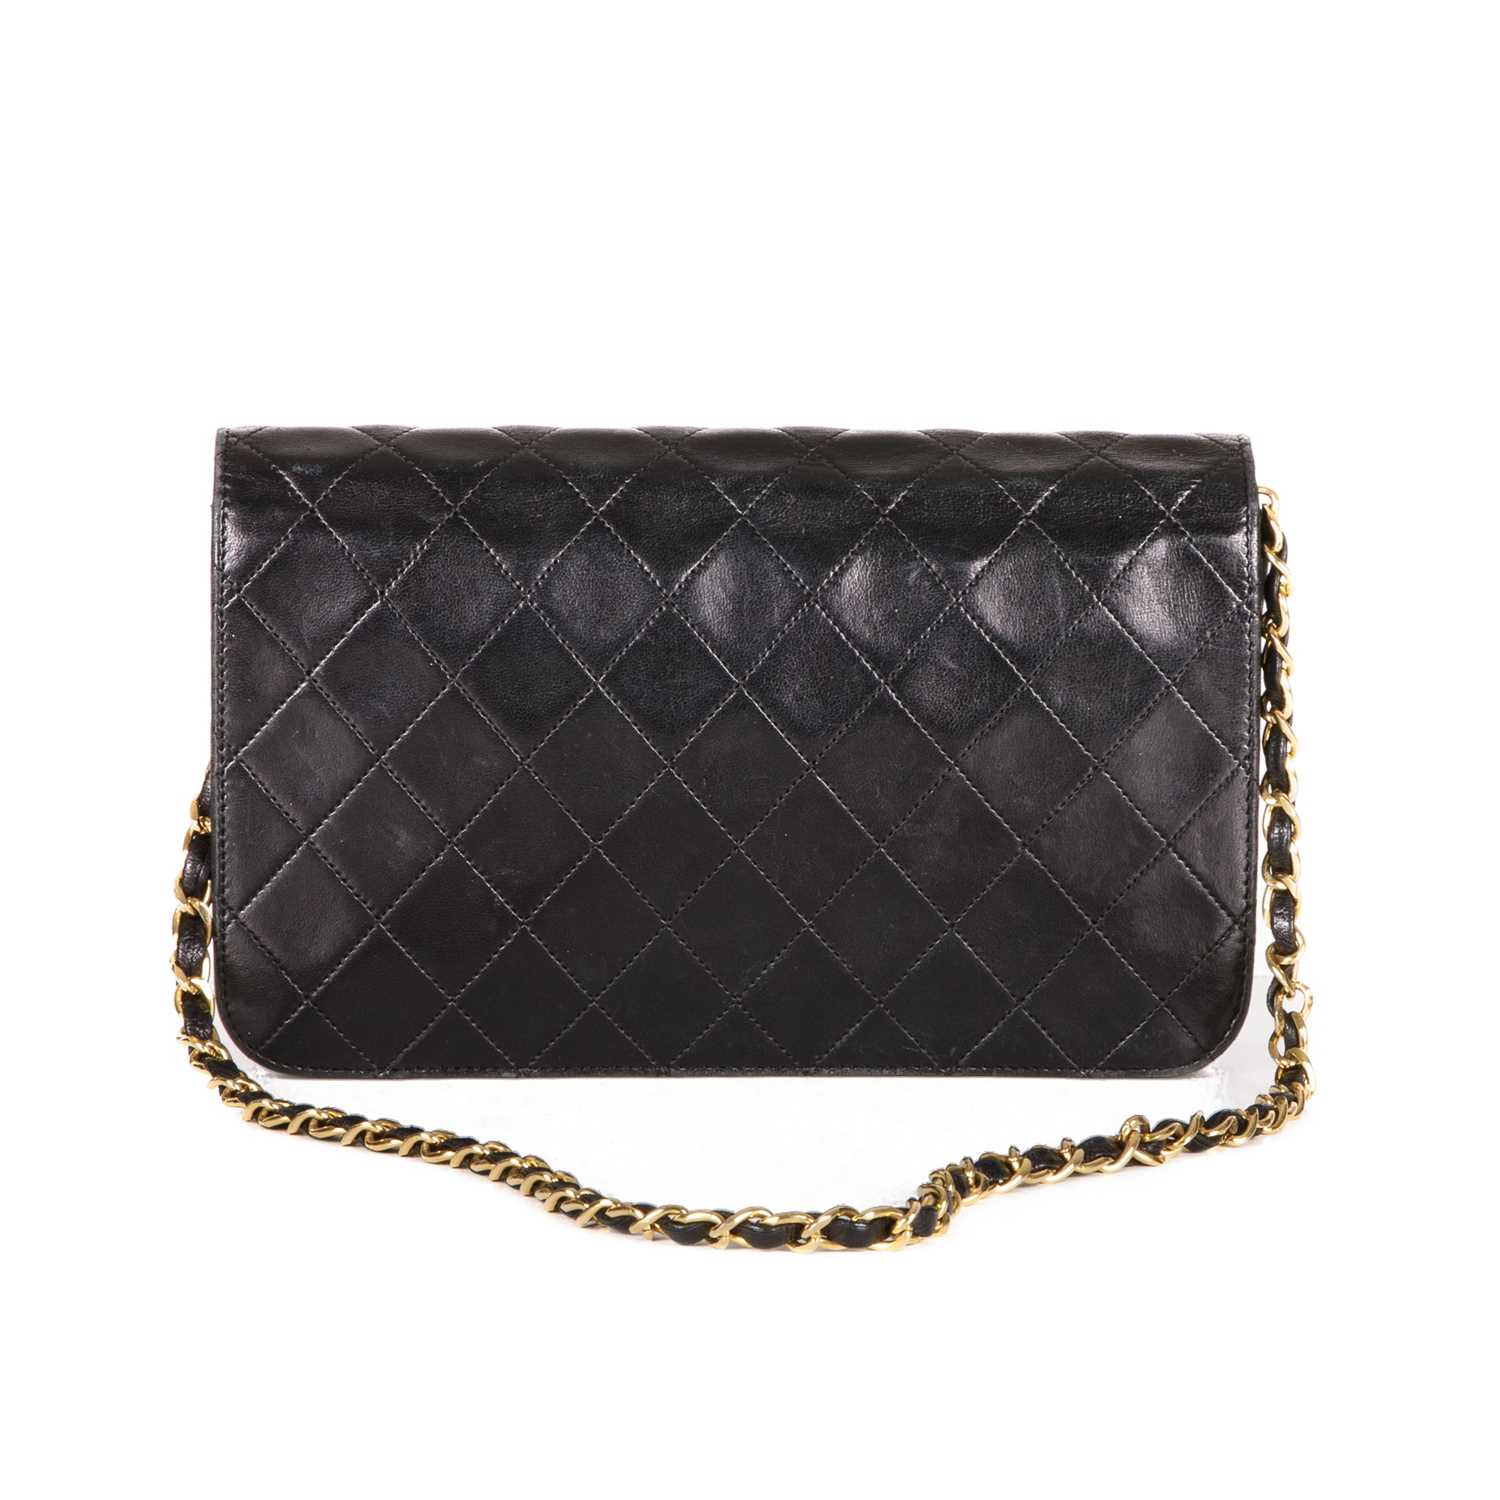 Chanel, a vintage CC Push Lock Full Flap handbag, designed with a diamond quilted black leather - Image 2 of 4